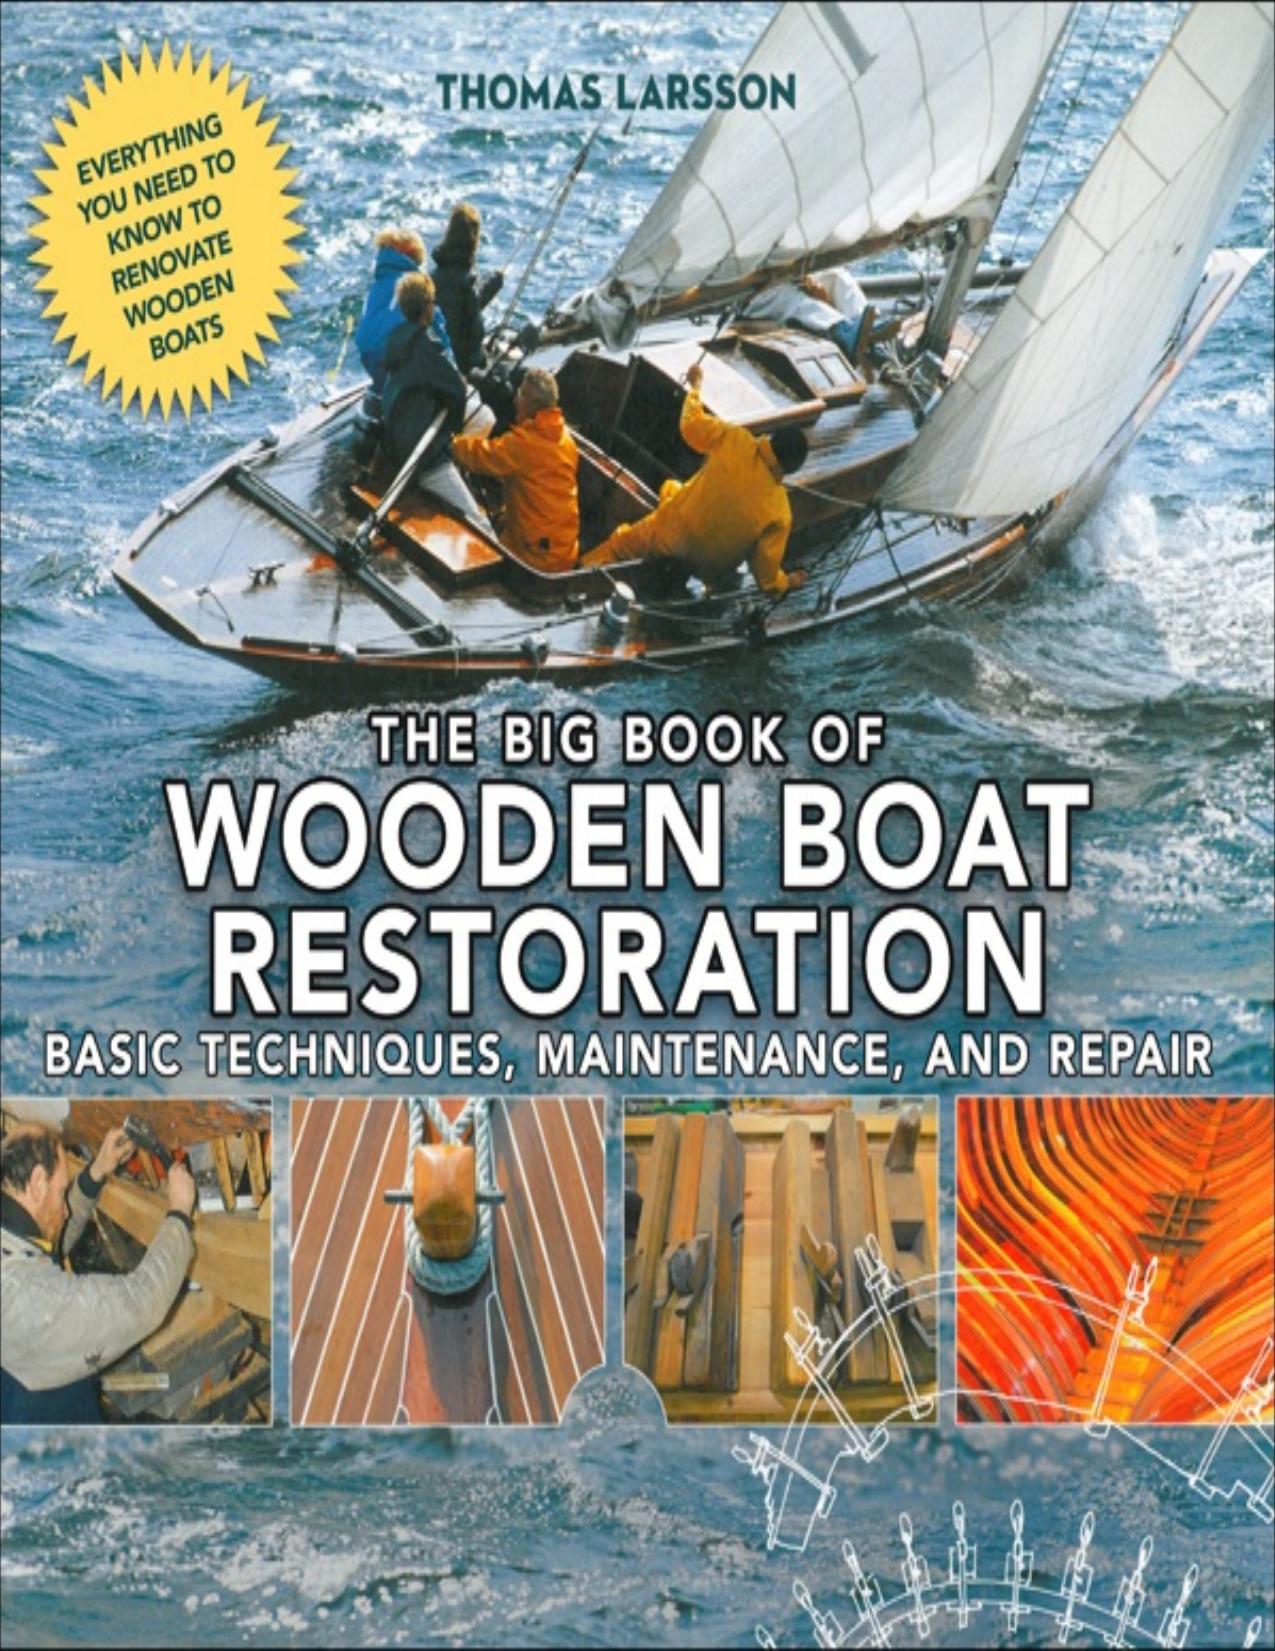 The big book of wooden boat restoration : basic techniques, maintenance, and repair - PDFDrive.com by Thomas Larsson